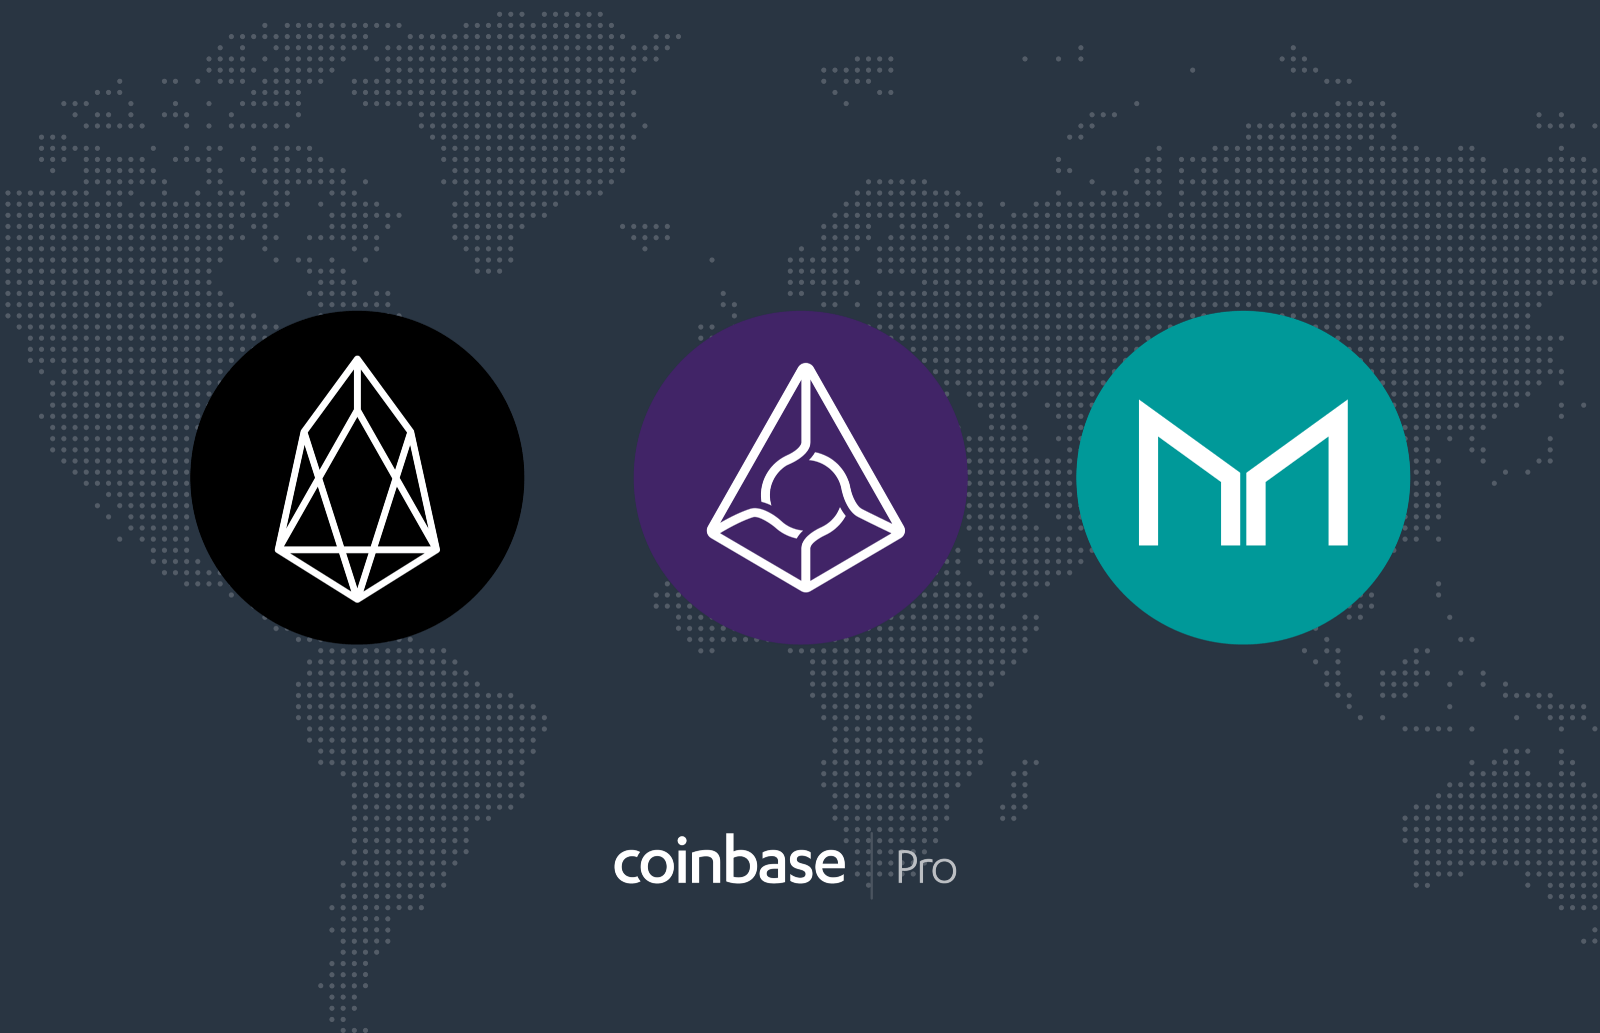 Coinbase Pro Adds Support For EOS, Augur and Maker